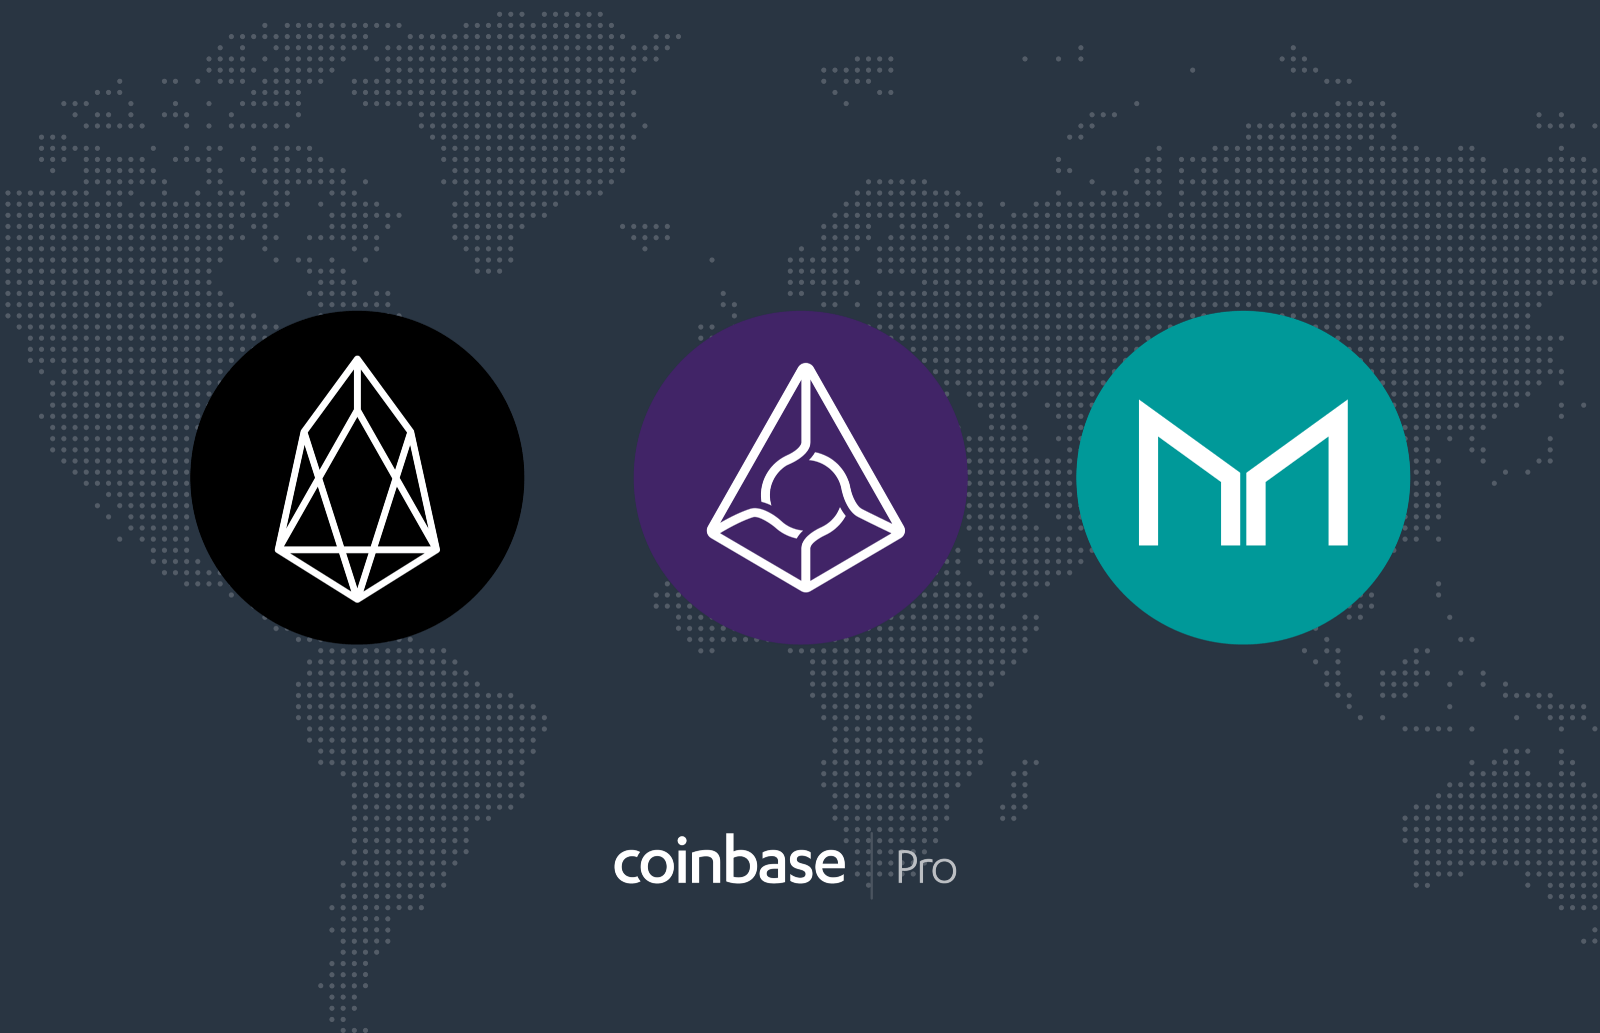 Coinbase Pro Adds Support For EOS, Augur and Maker